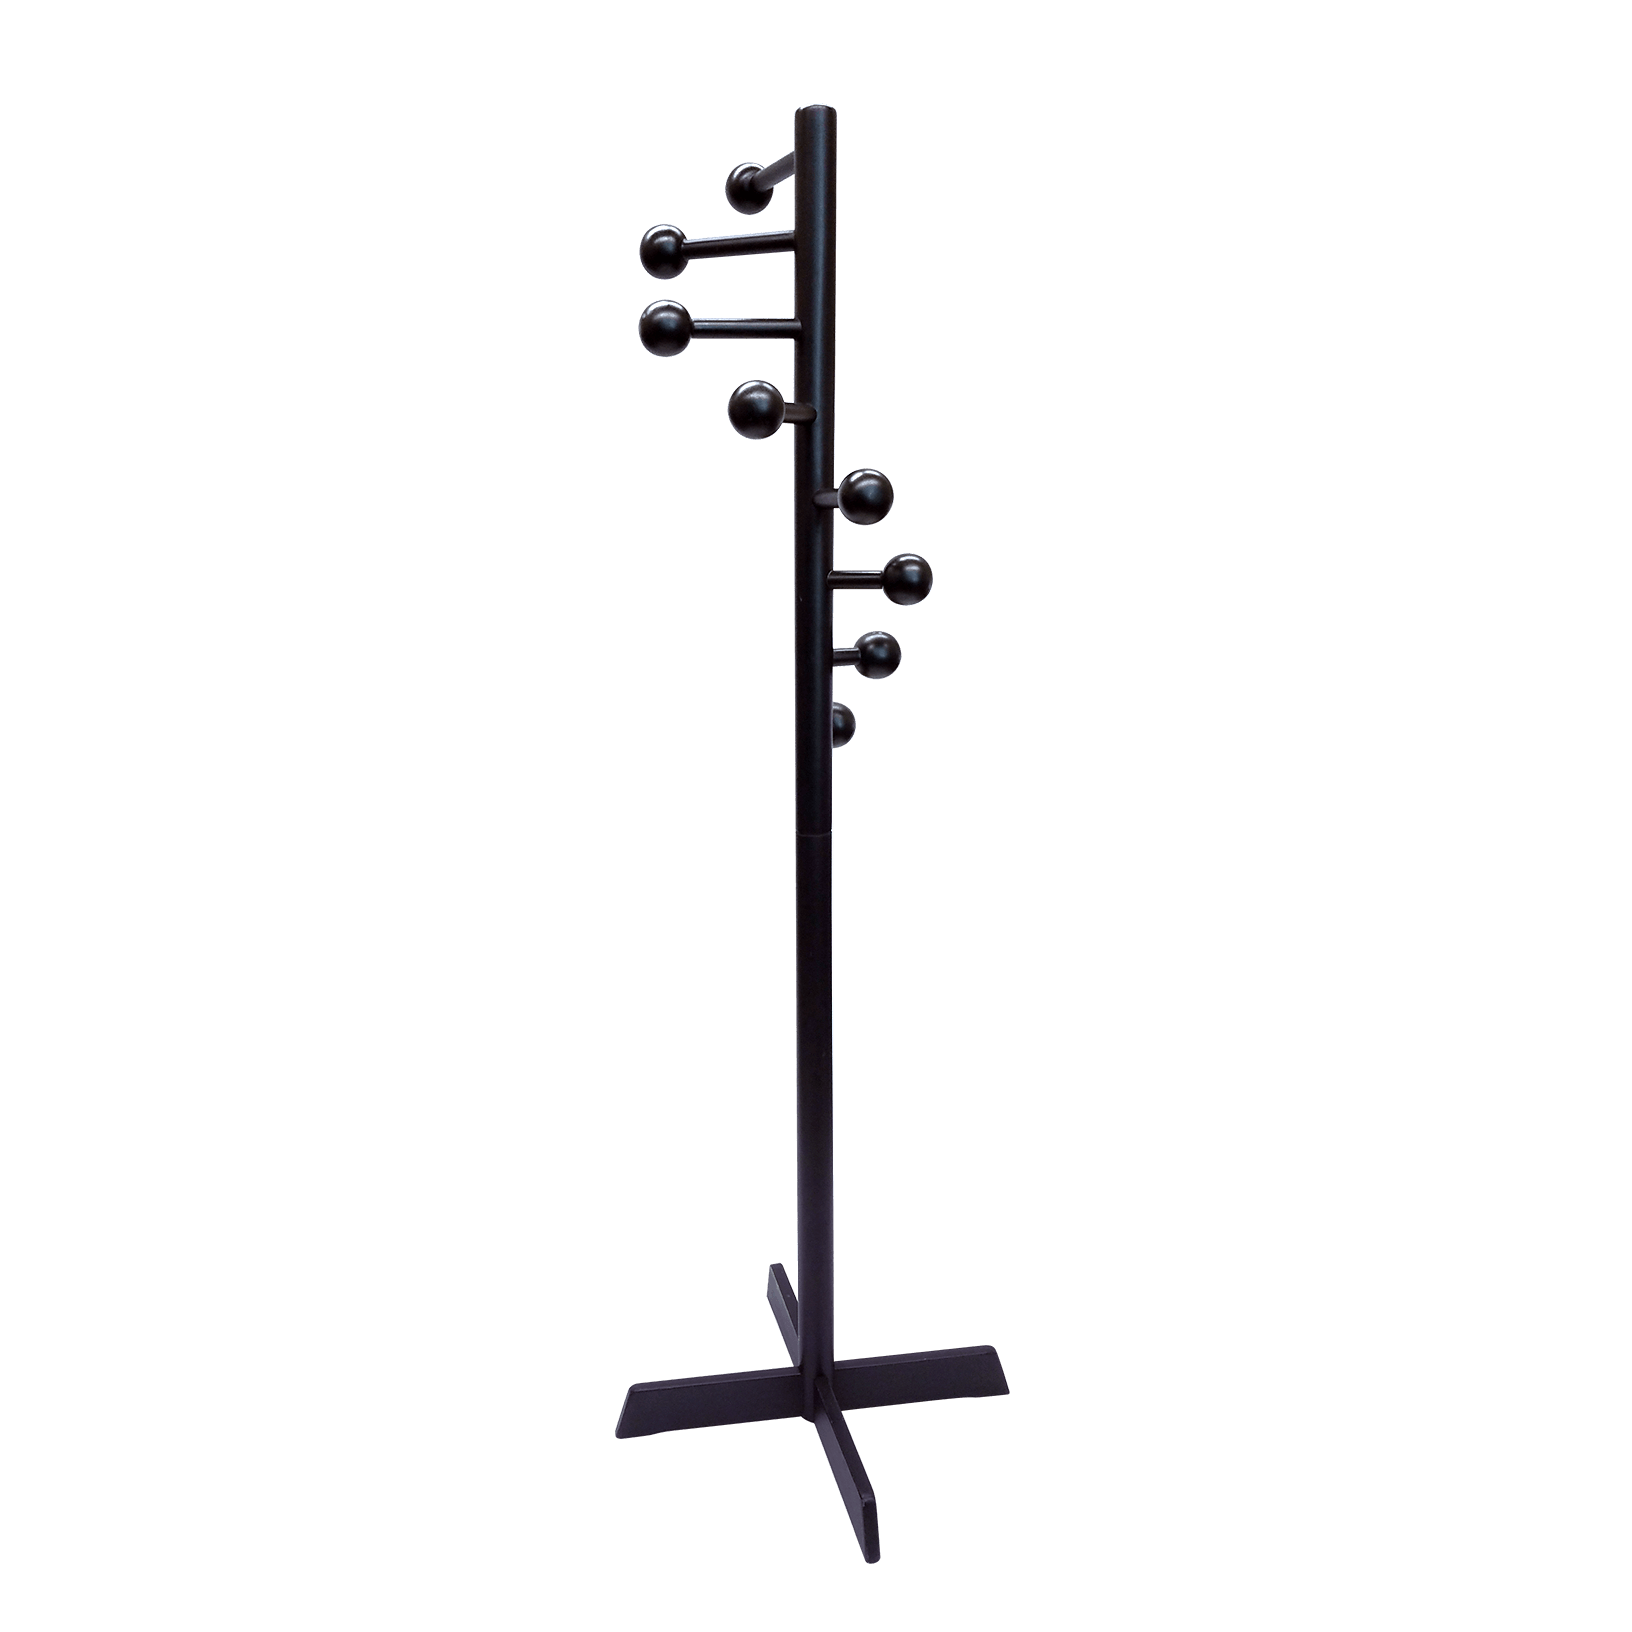 Full view of the spiral coat stand